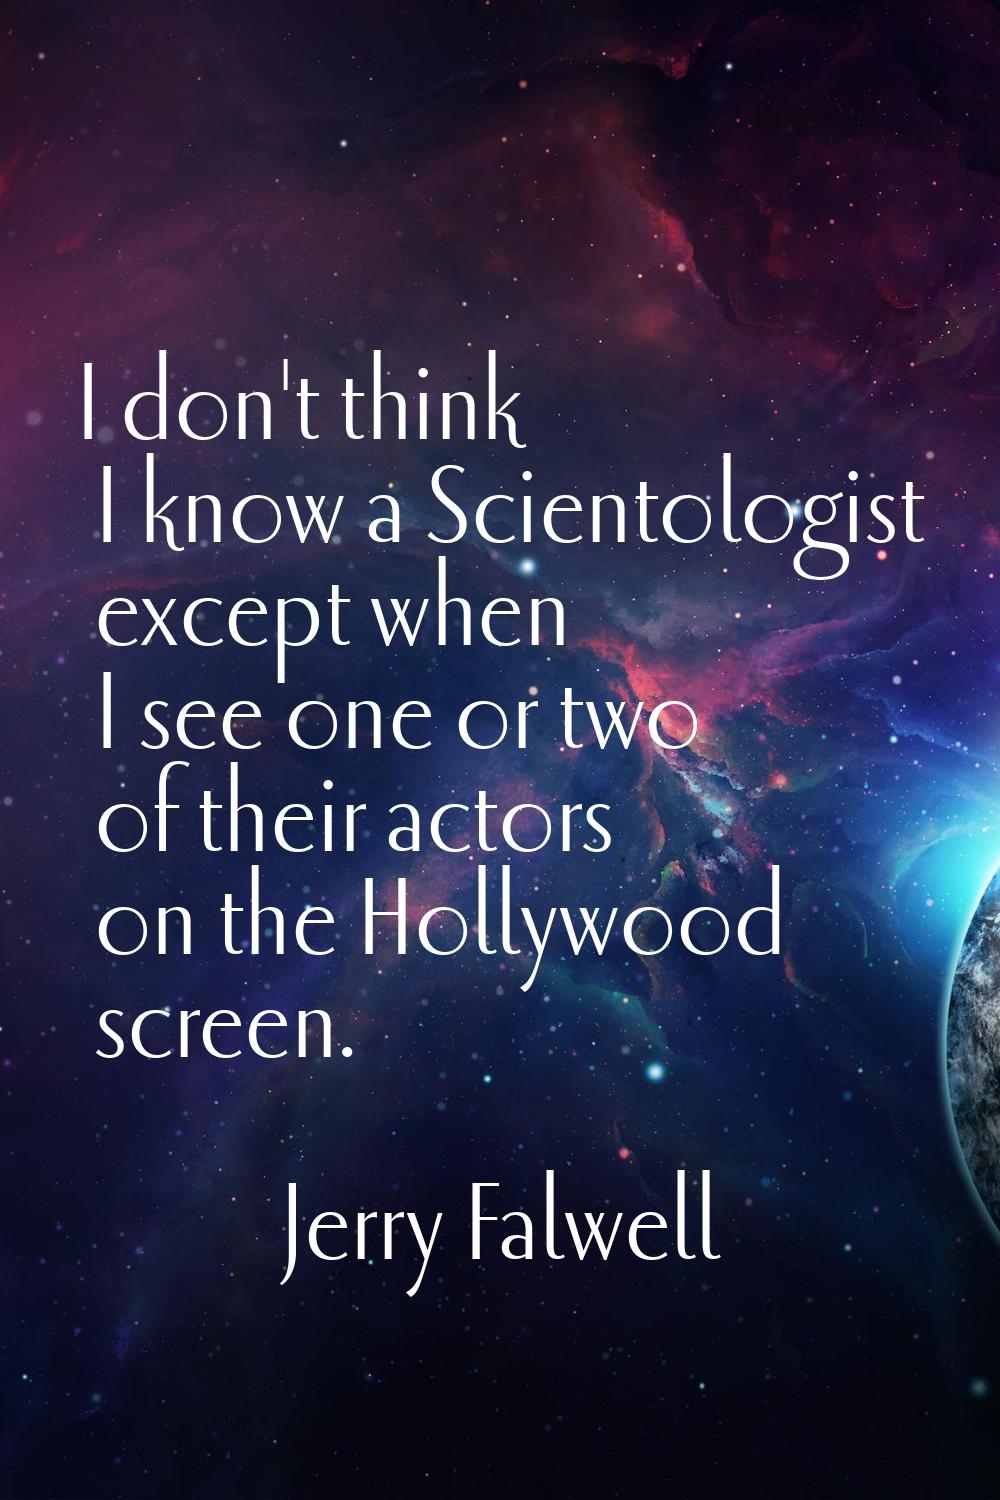 I don't think I know a Scientologist except when I see one or two of their actors on the Hollywood 